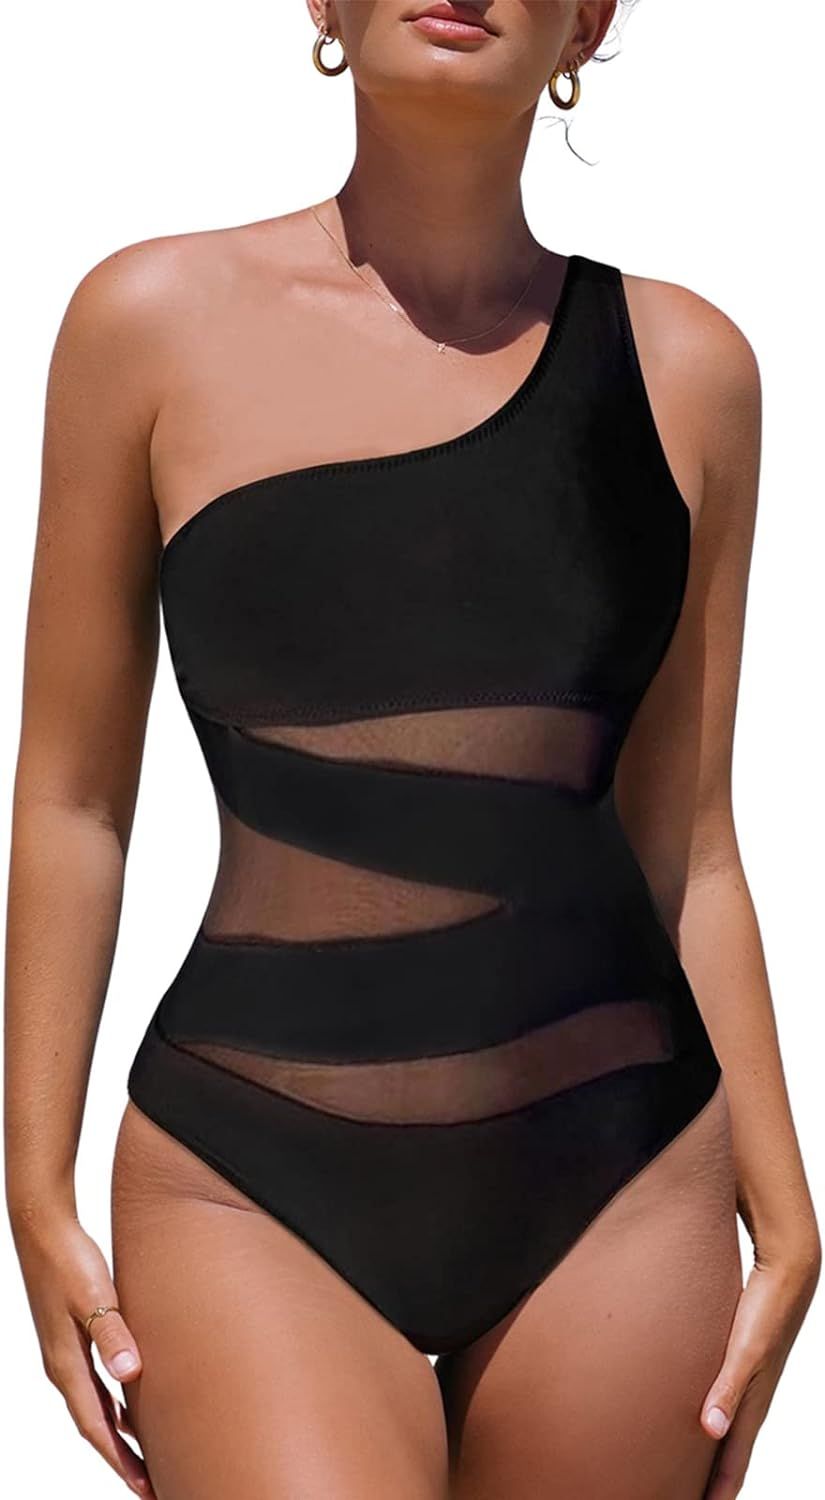 Roselychic One Piece Bathing Suit for Women One Shoulder Tummy Control Swimsuits for Women Mesh | Amazon (US)